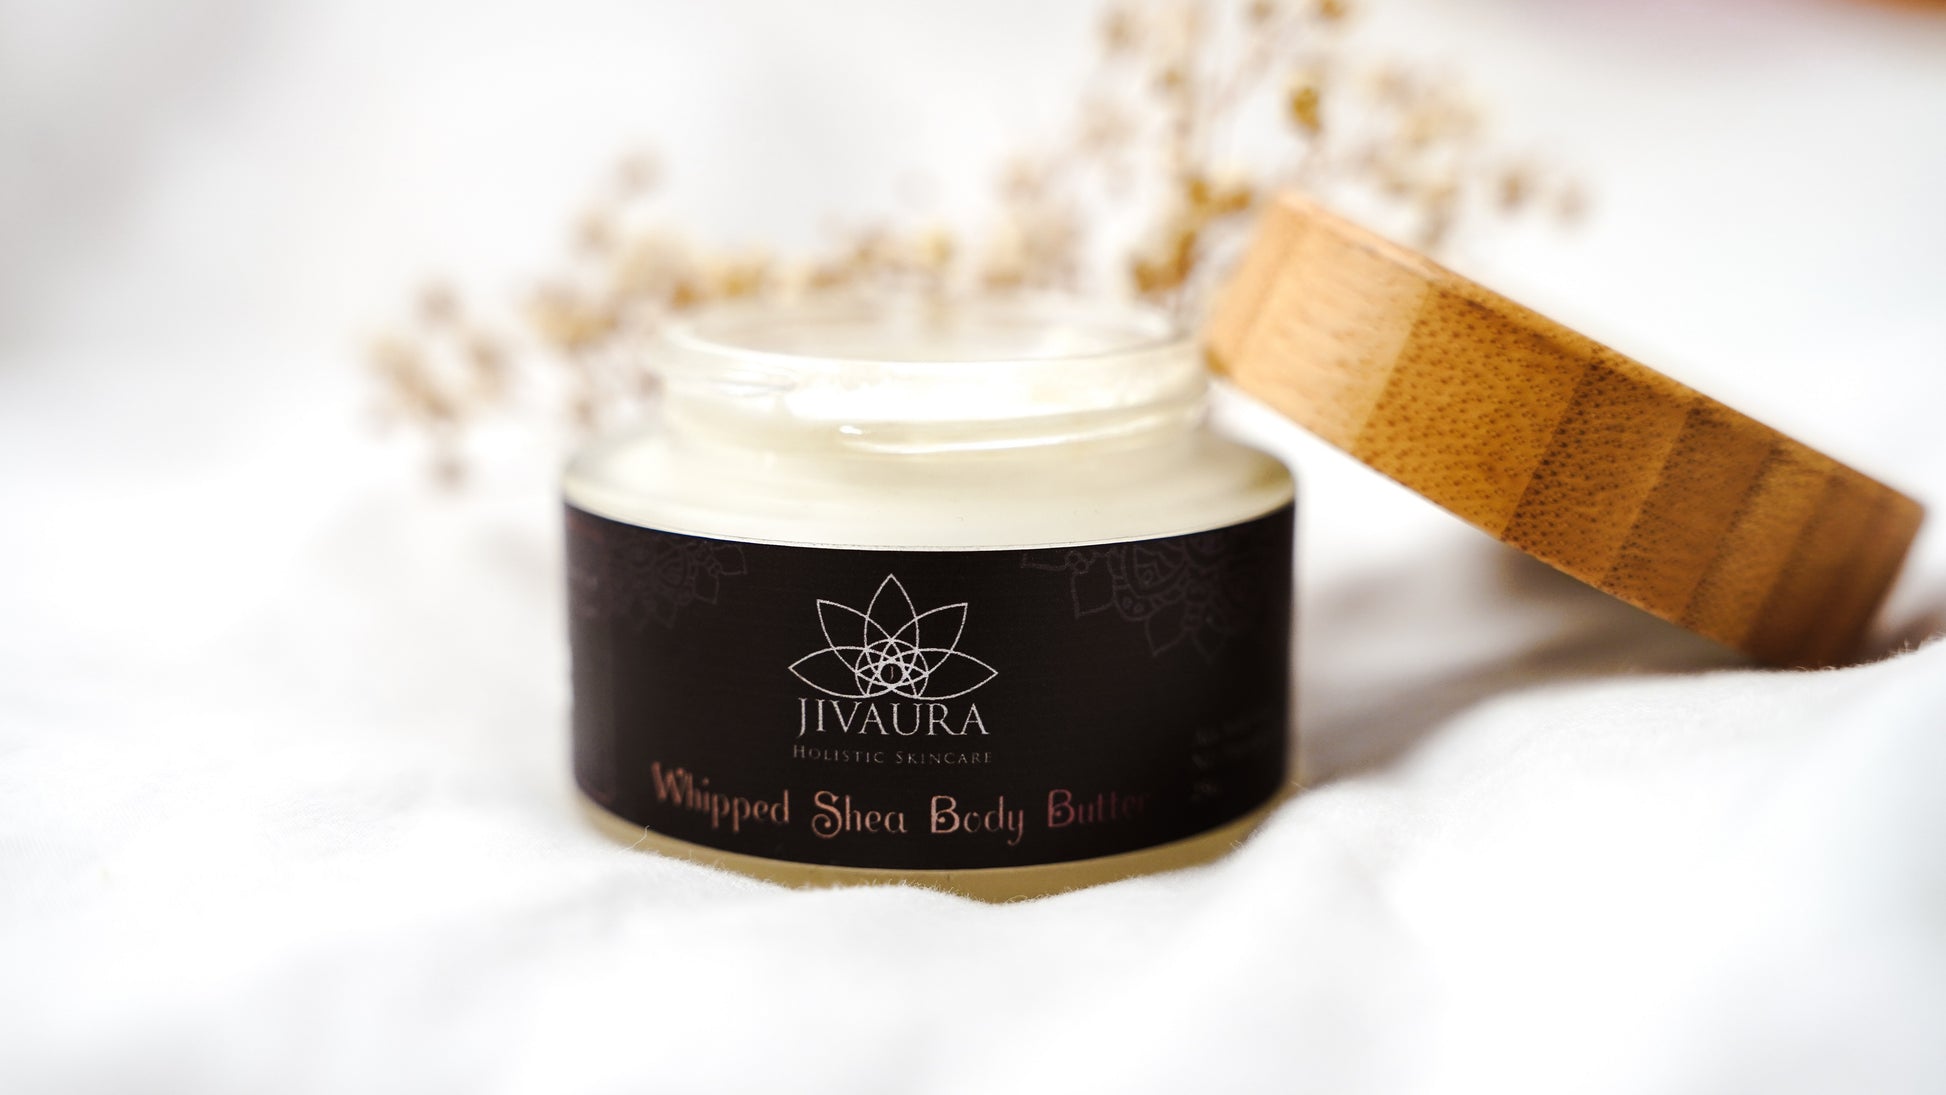 Whipped Shea Body Butter By Jivaura - THE CURVE CULT